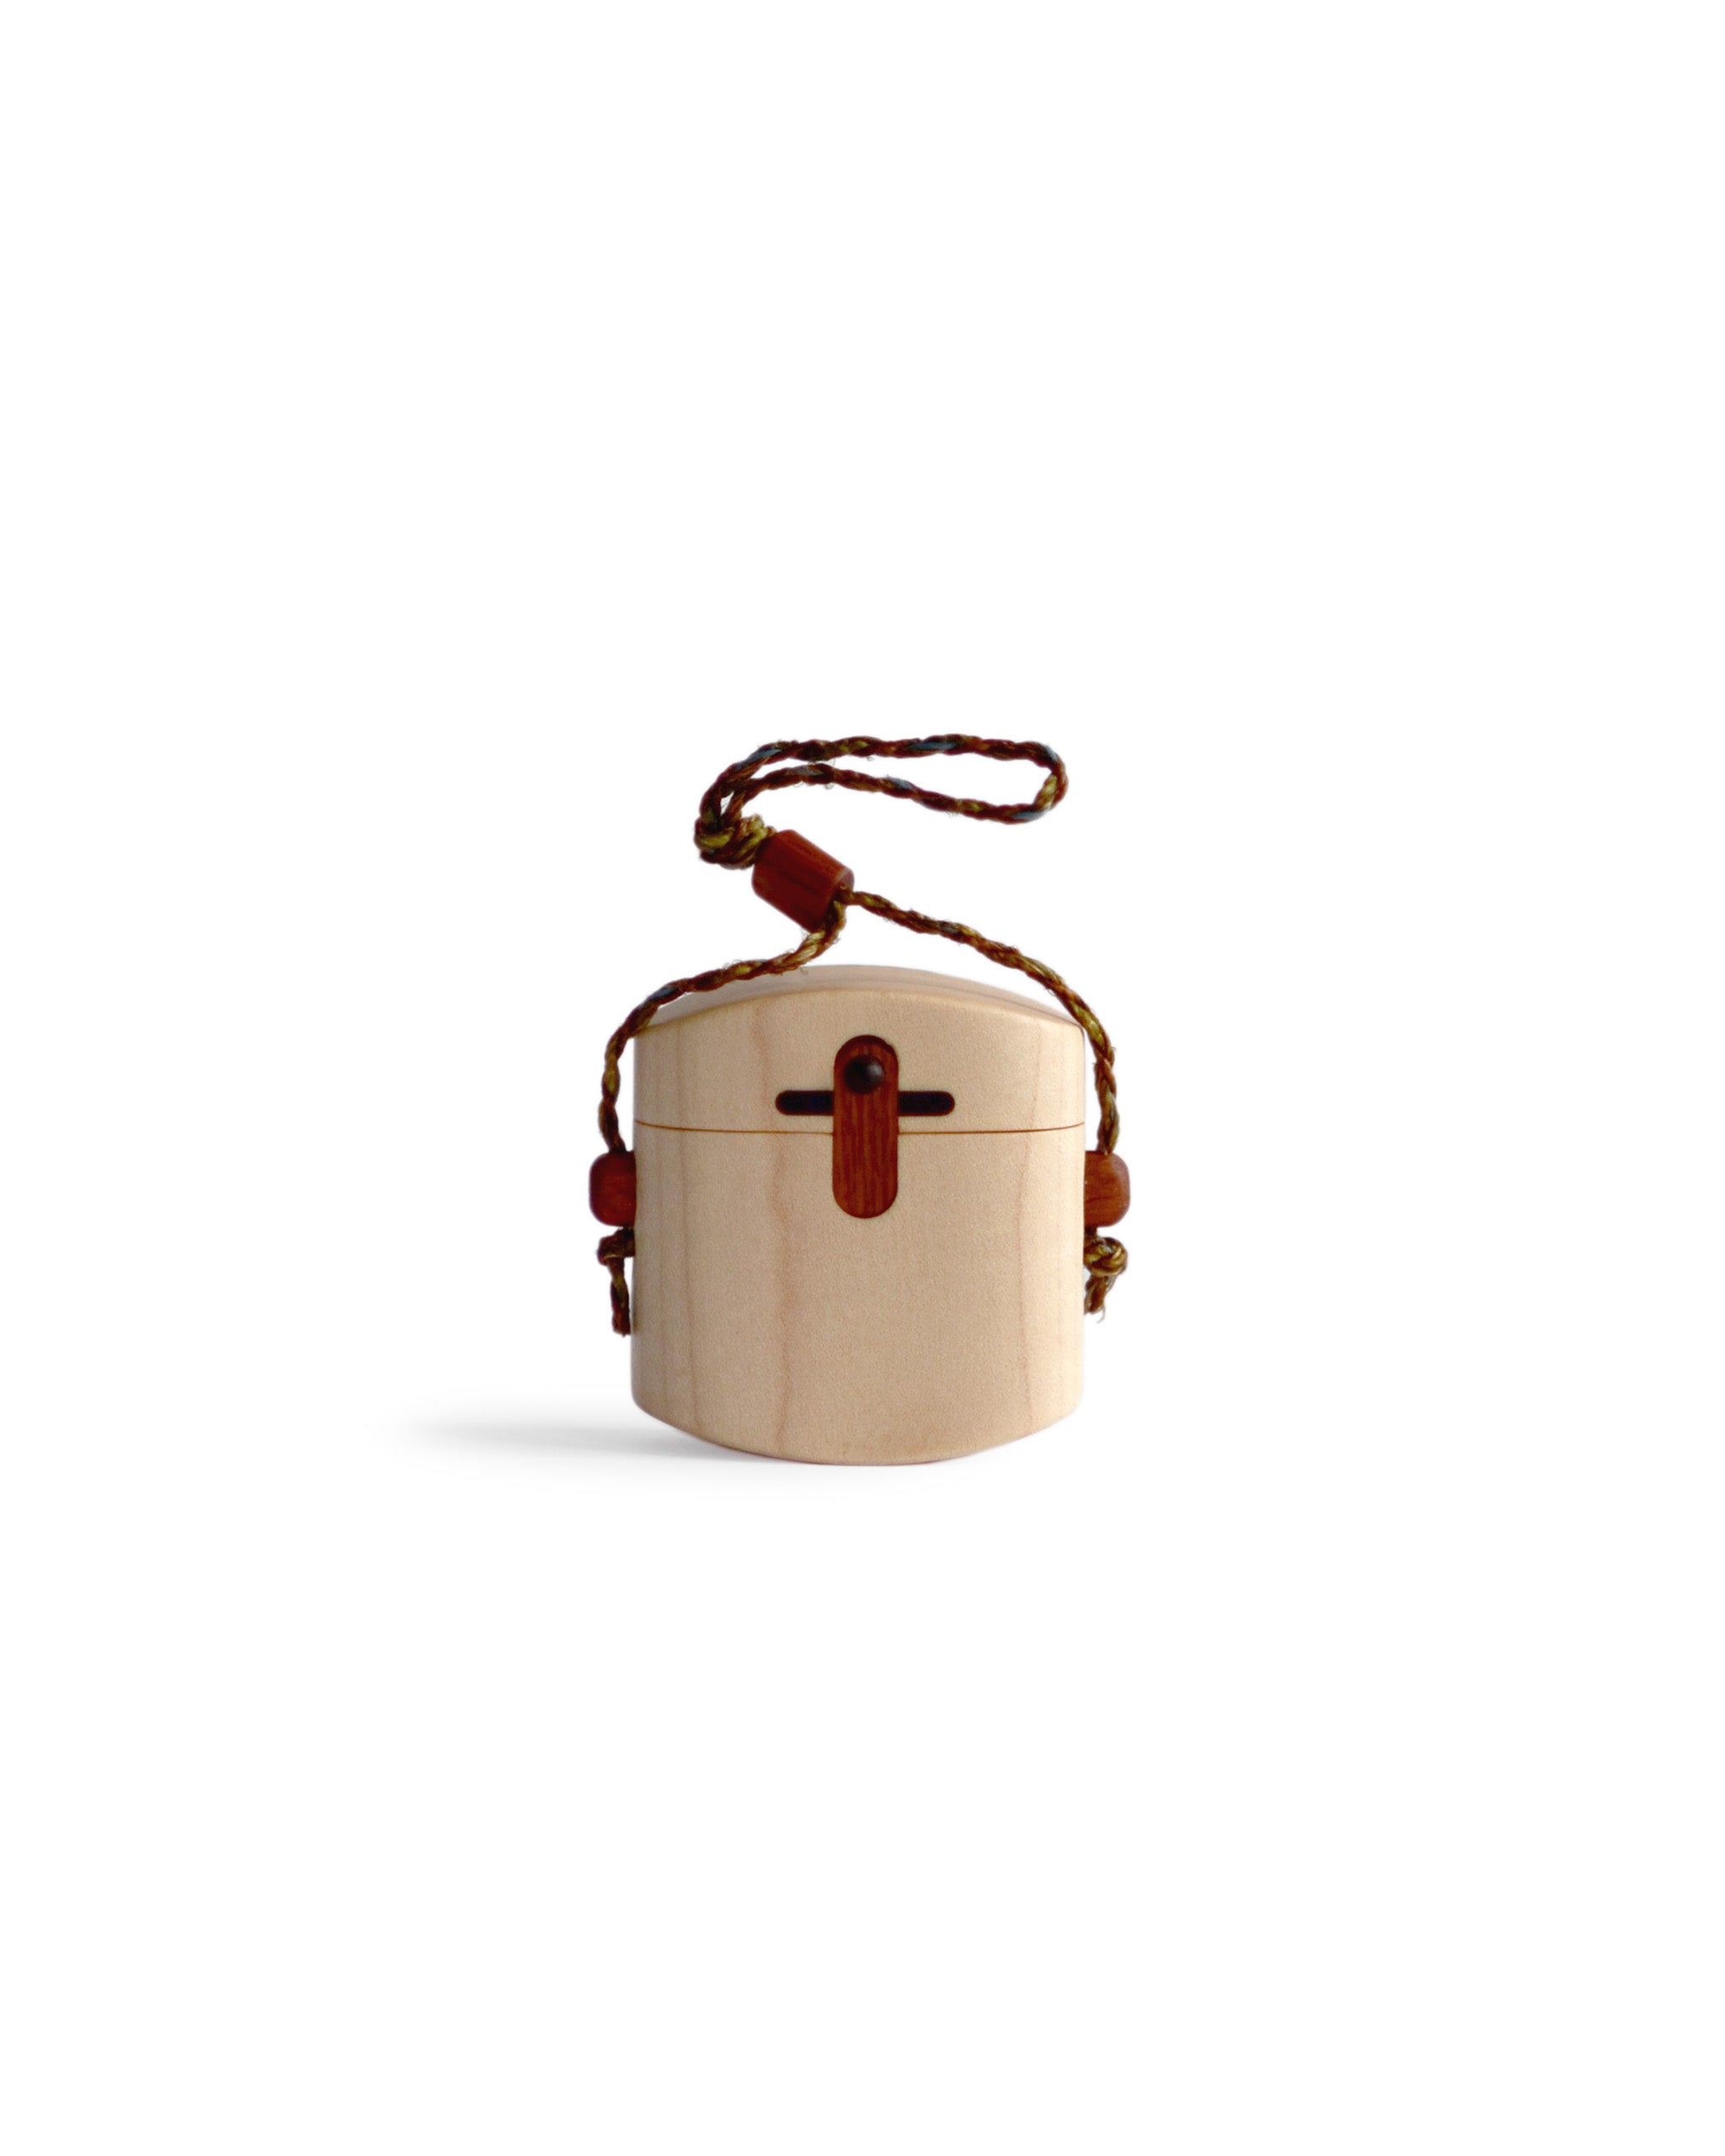 Silhouetted image of maple pill case with cord by Norio Tanno against white background.